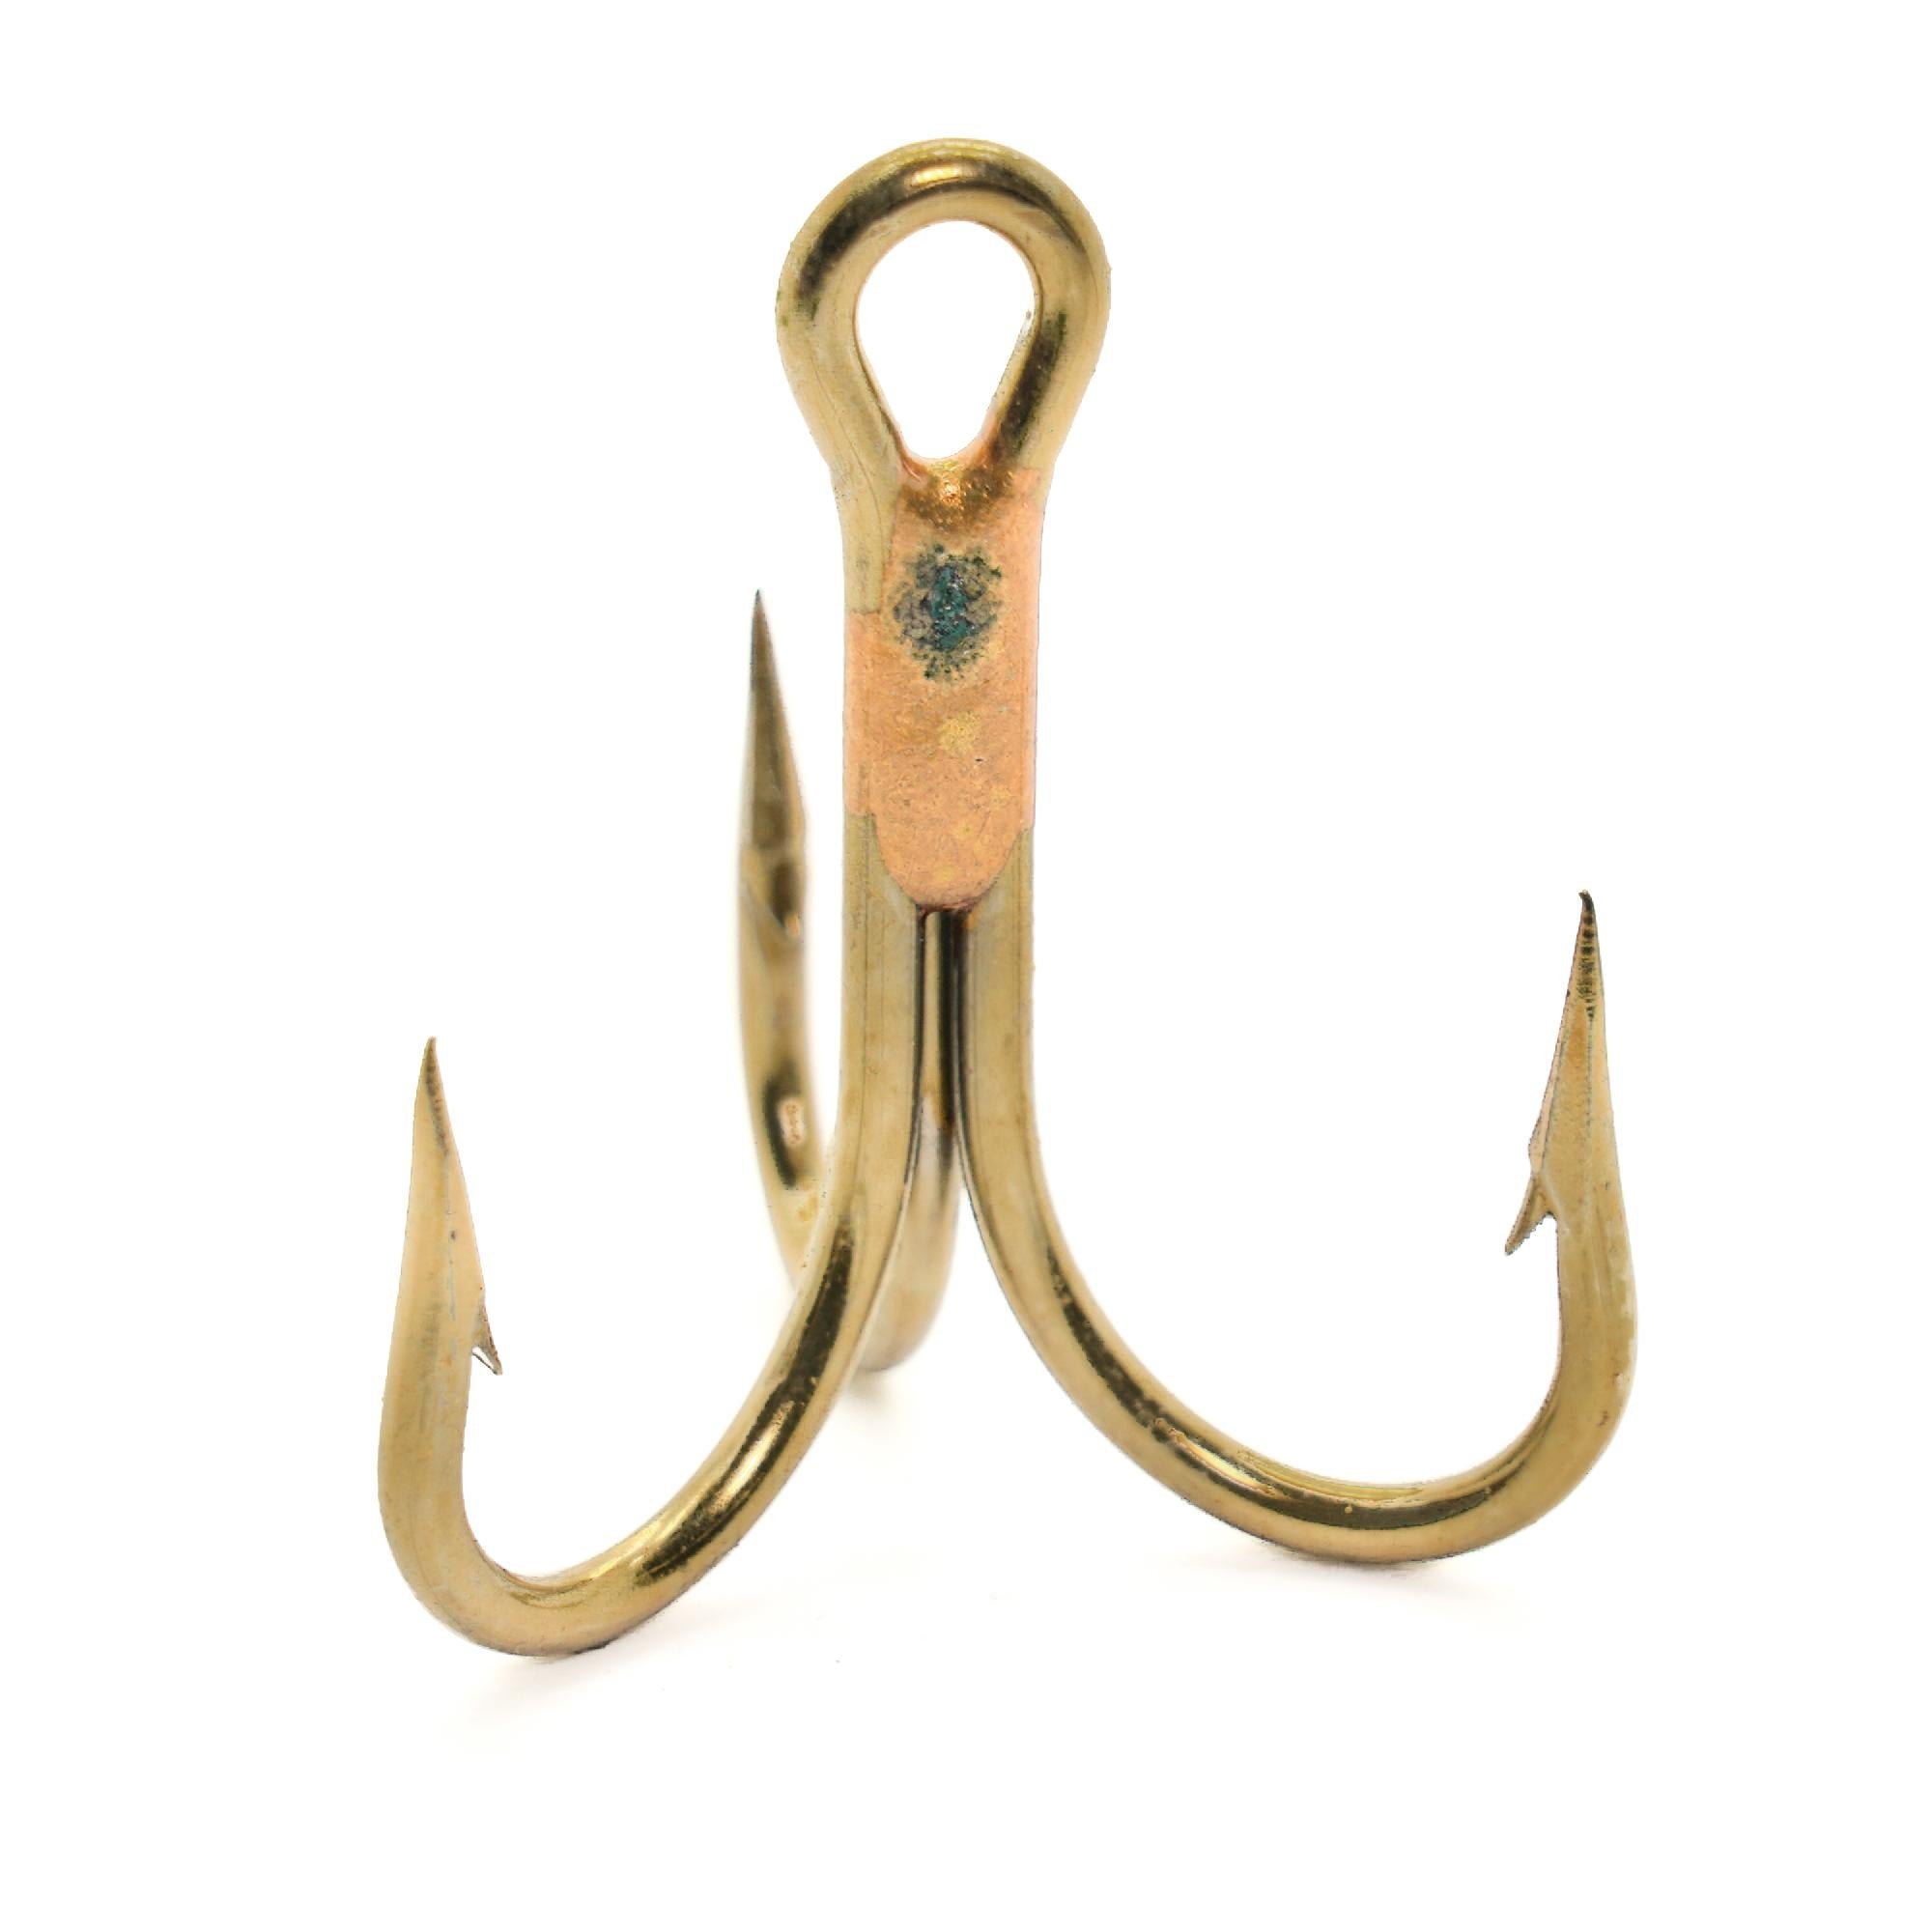 Mustad 3551 - 2/0 - 10 pack - Musky Tackle Online